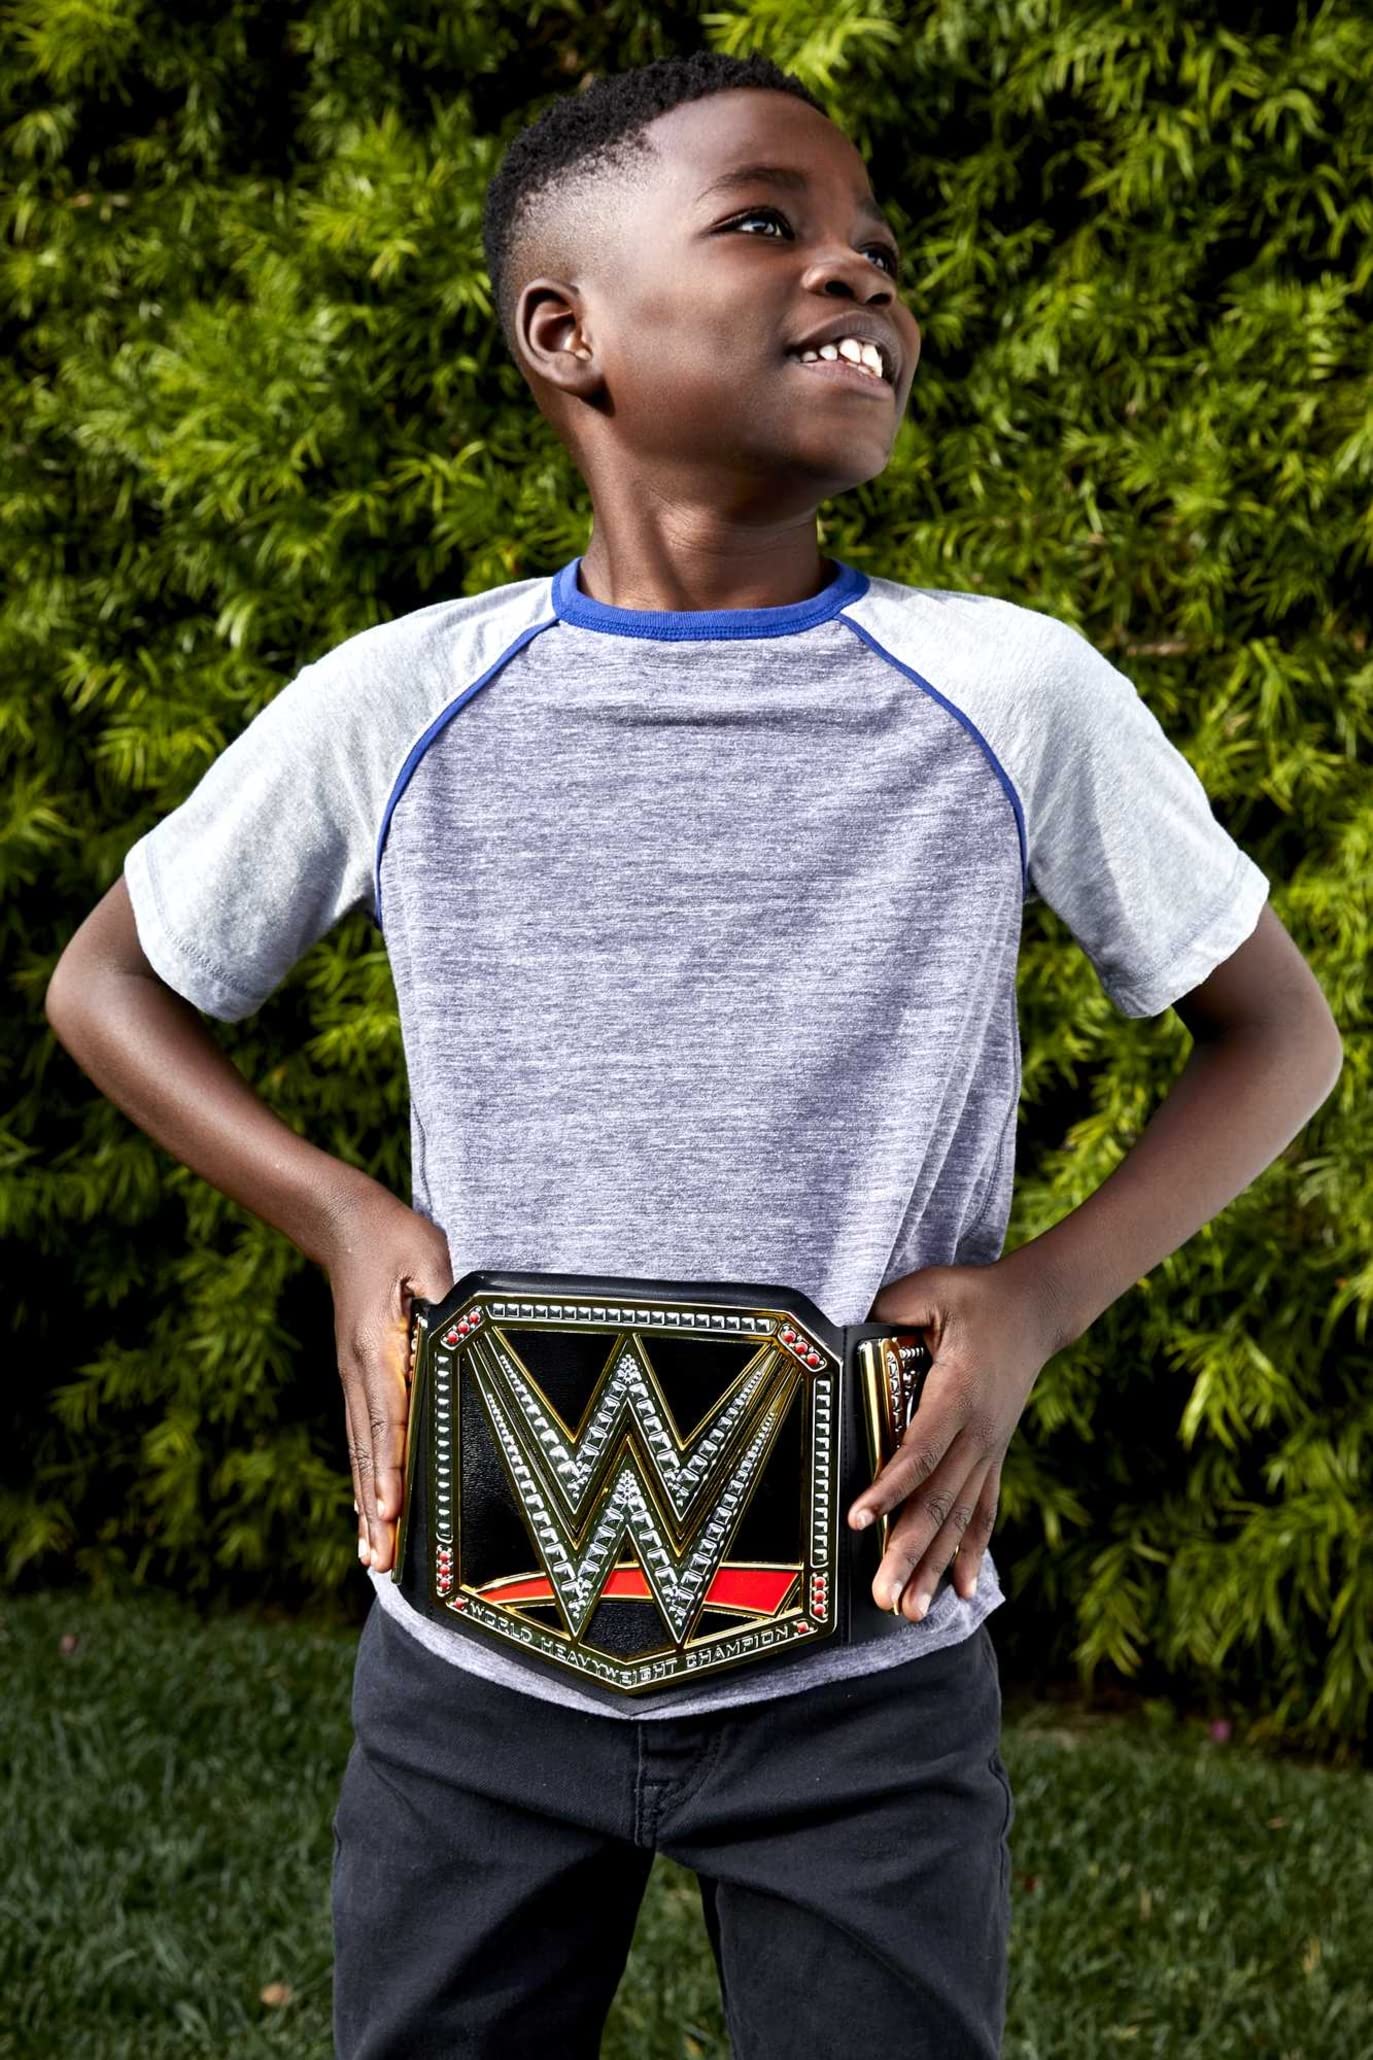 Mattel WWE Championship Role Play Title Belt with Adjustable Strap for Kids (Amazon Exclusive)